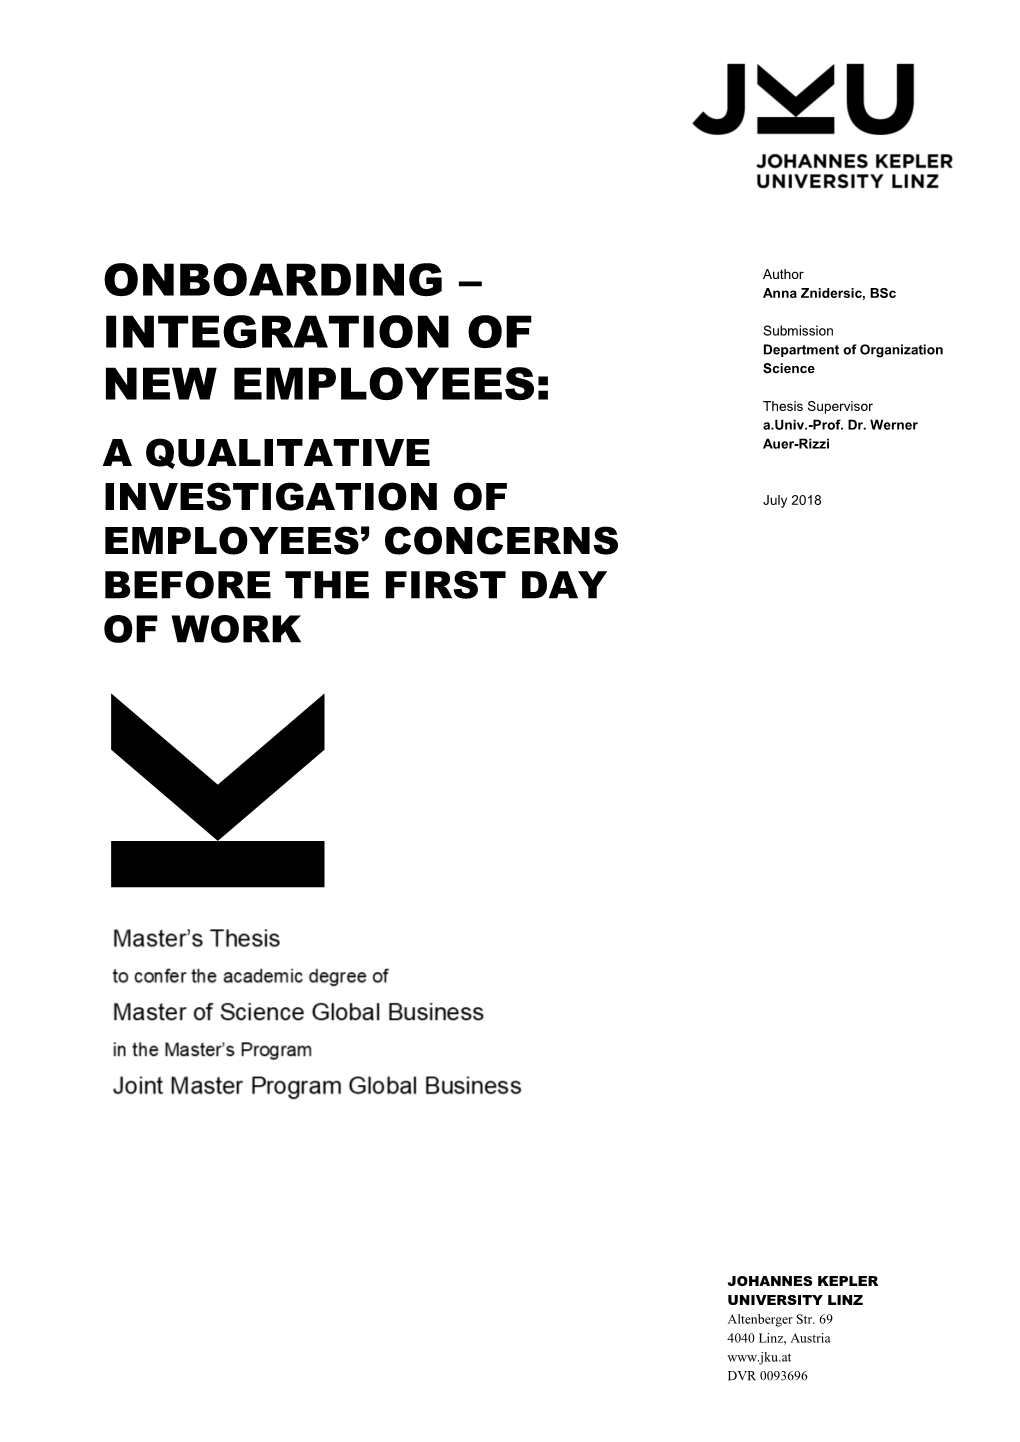 Onboarding – Integration of New Employees